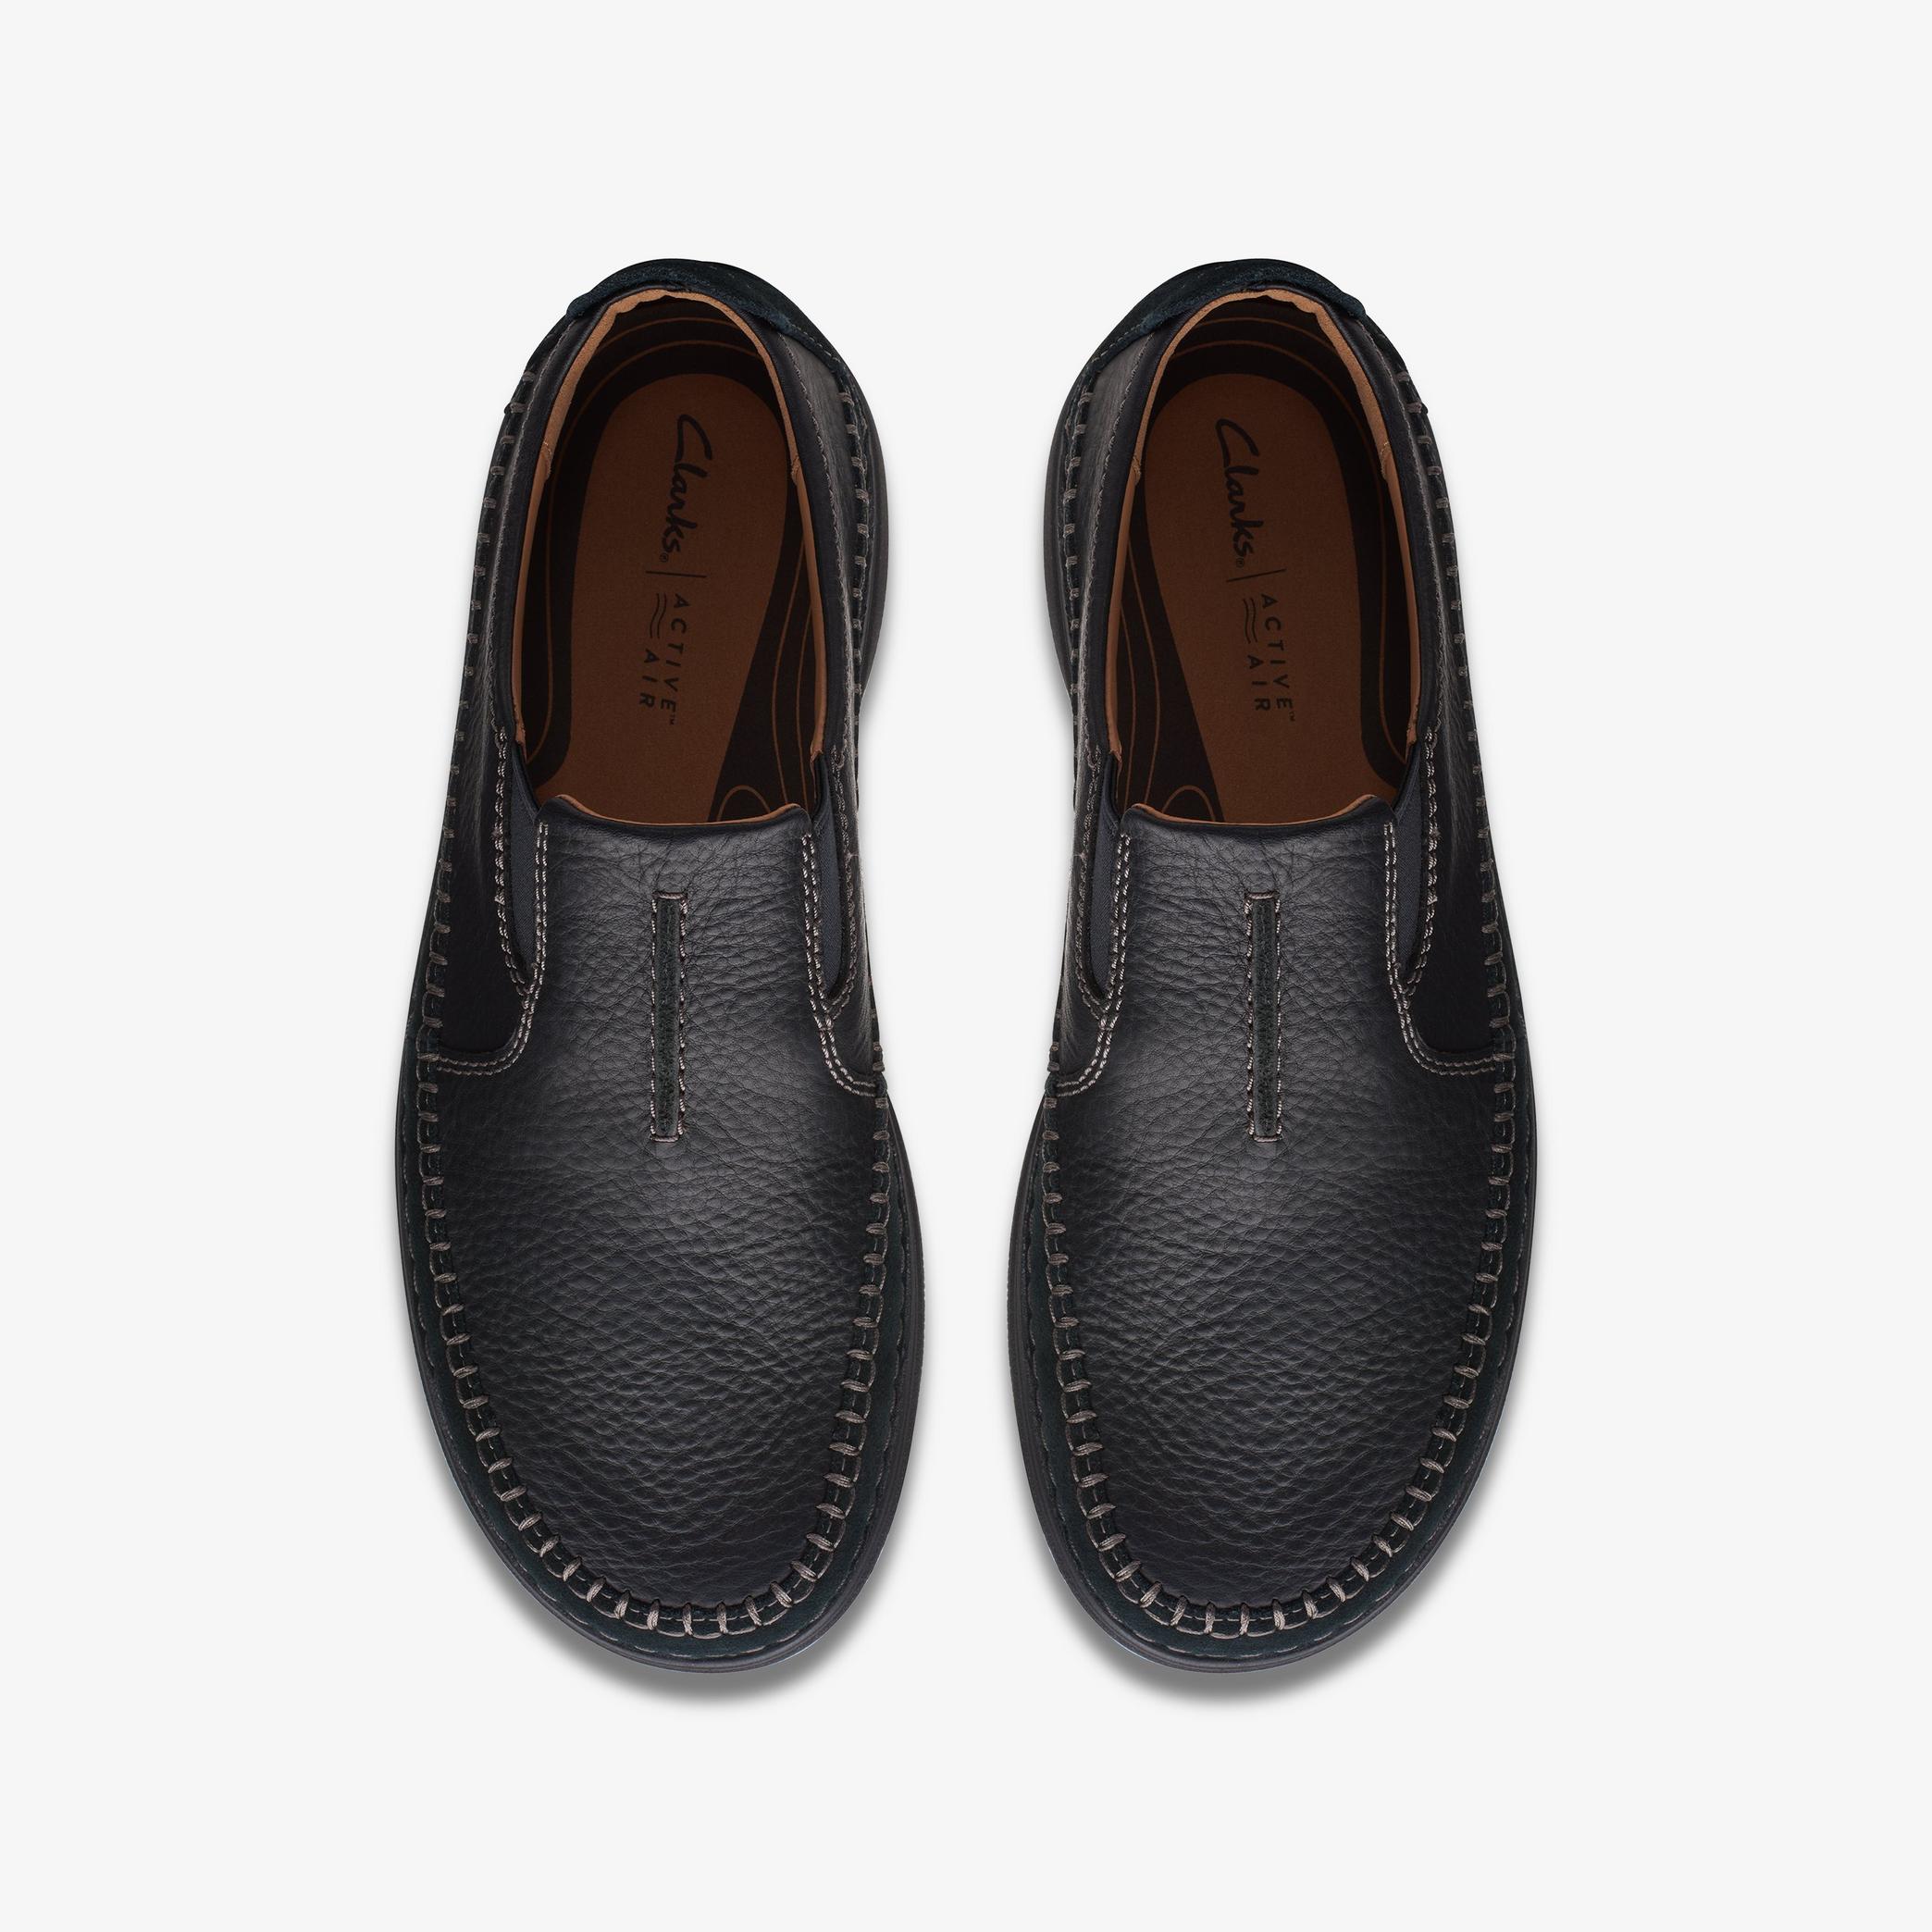 Nature 5 Walk Black Combination Loafers, view 6 of 6